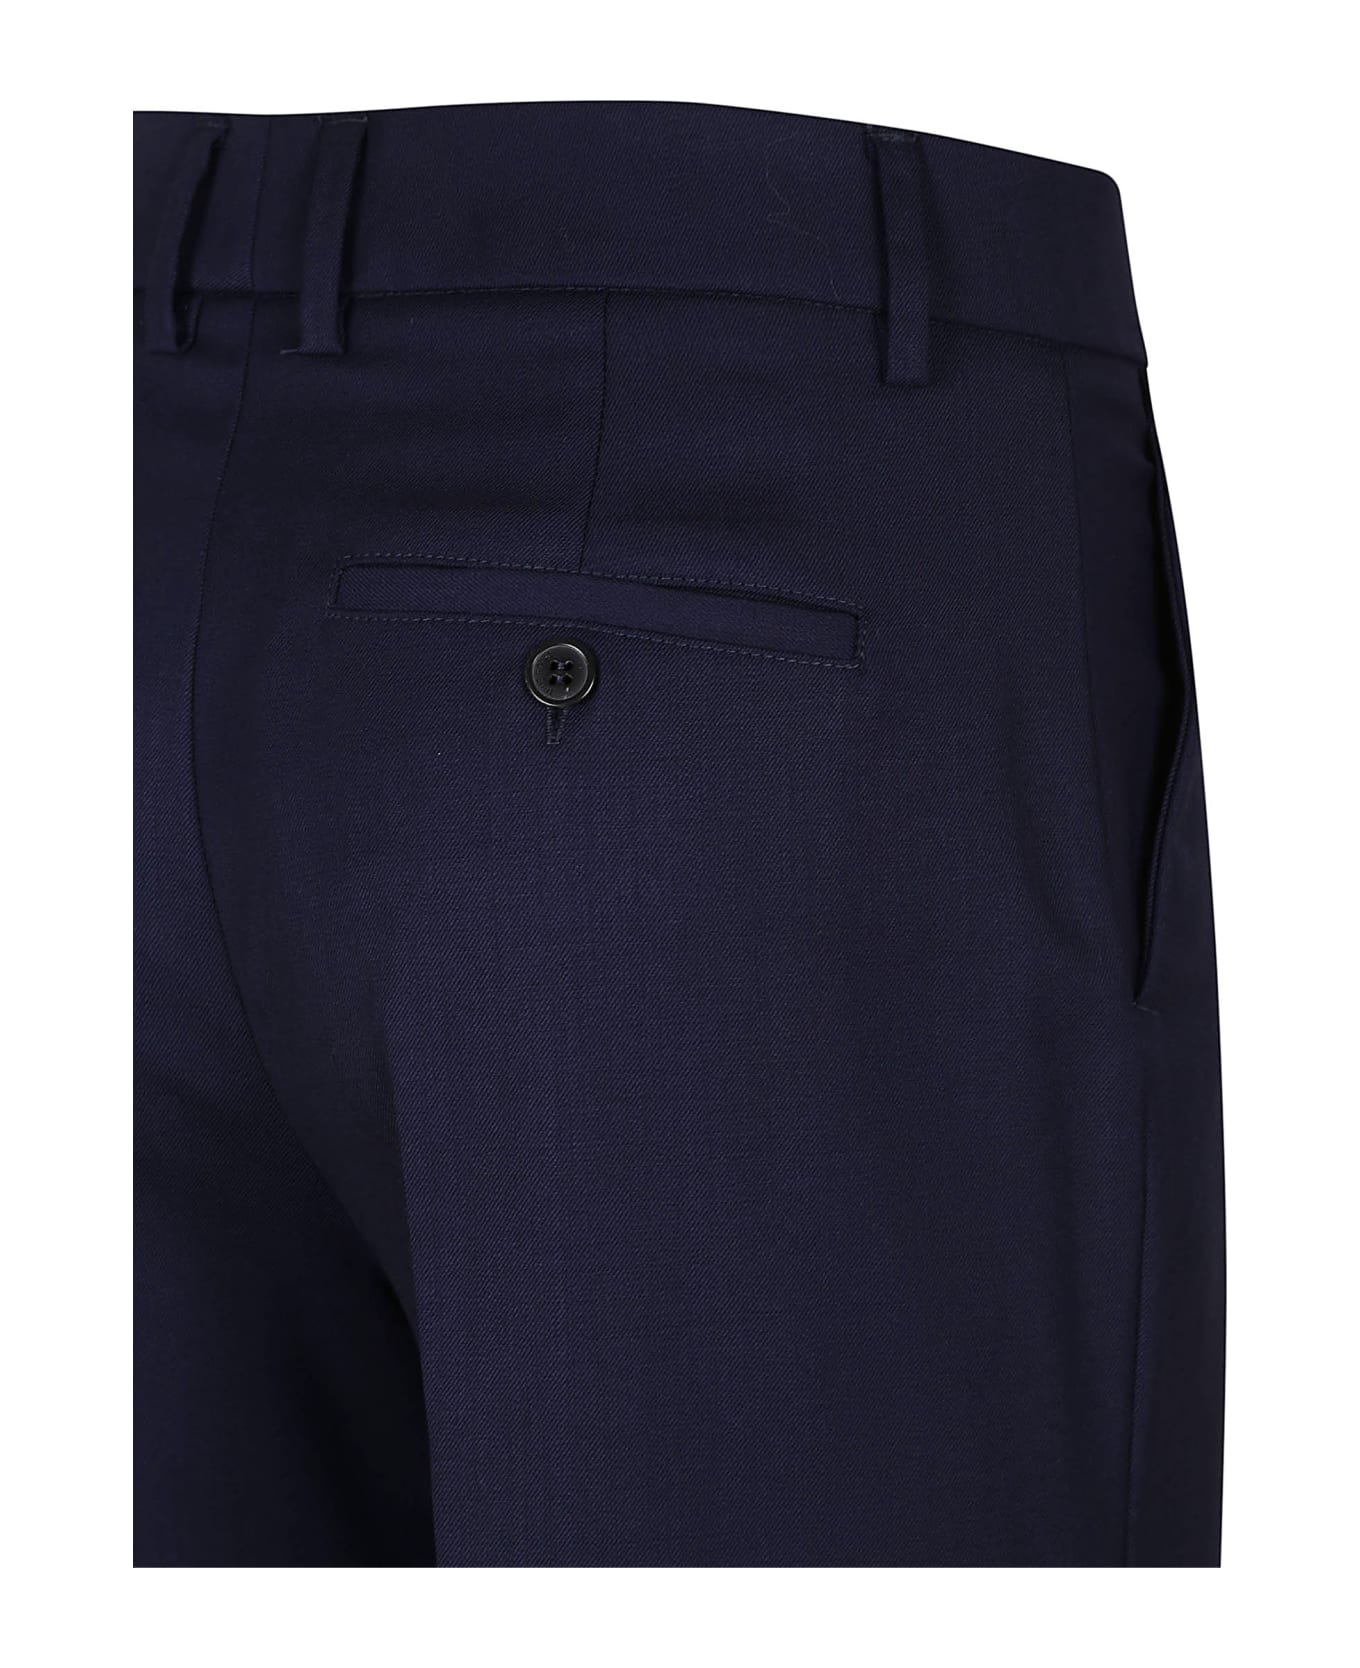 True Royal Trousers Blue - Blue ボトムス